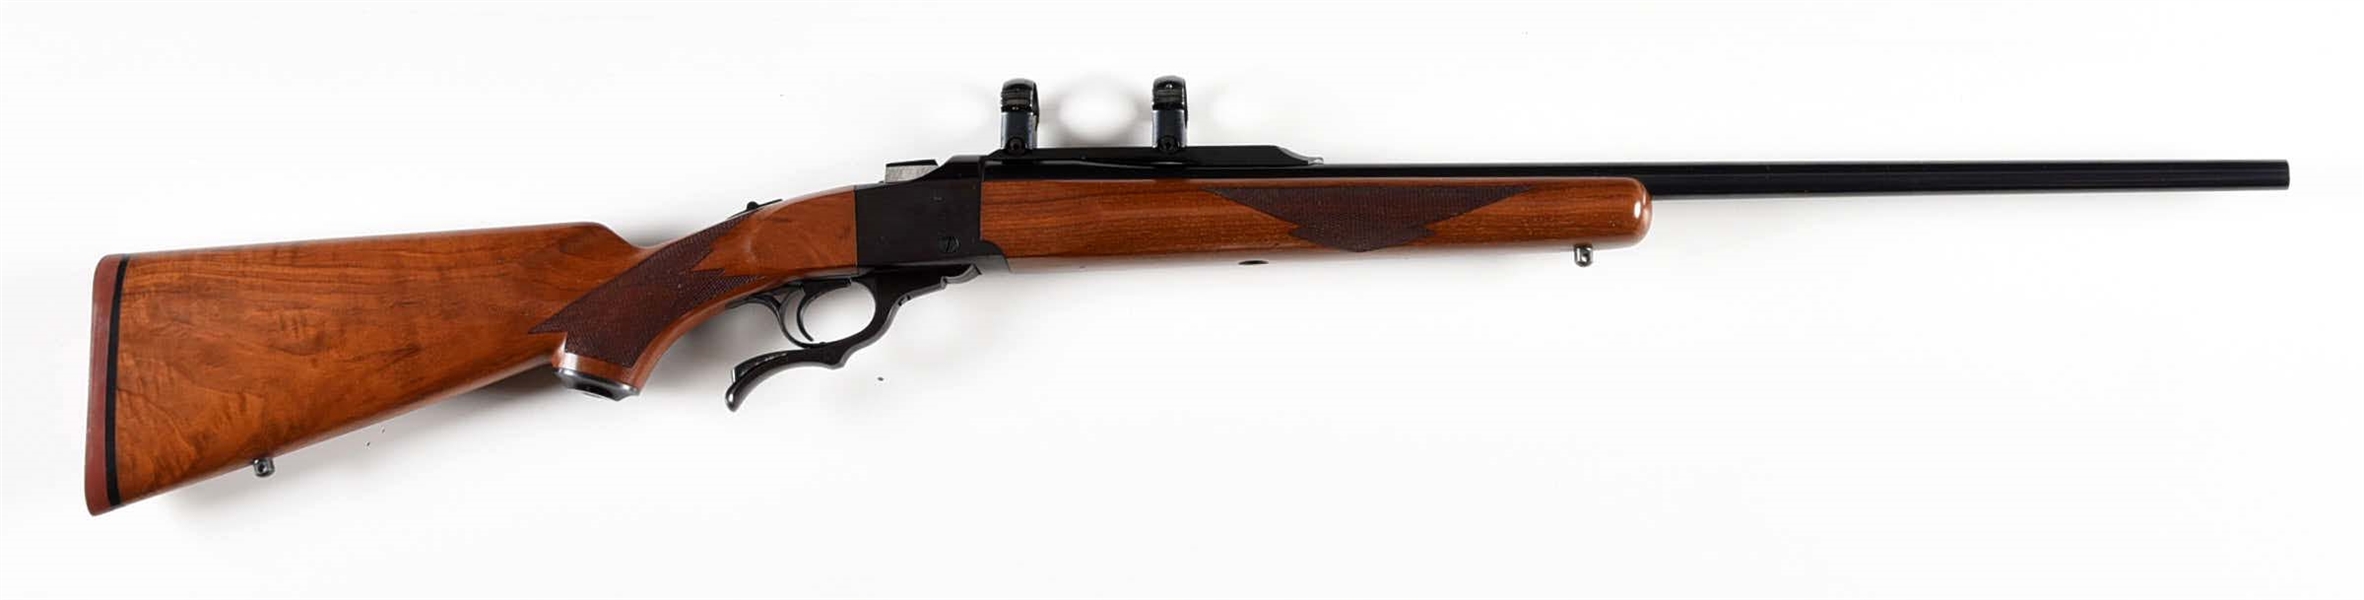 (M) RUGER NO. 1 SINGLE SHOT RIFLE IN .300 WIN MAG.